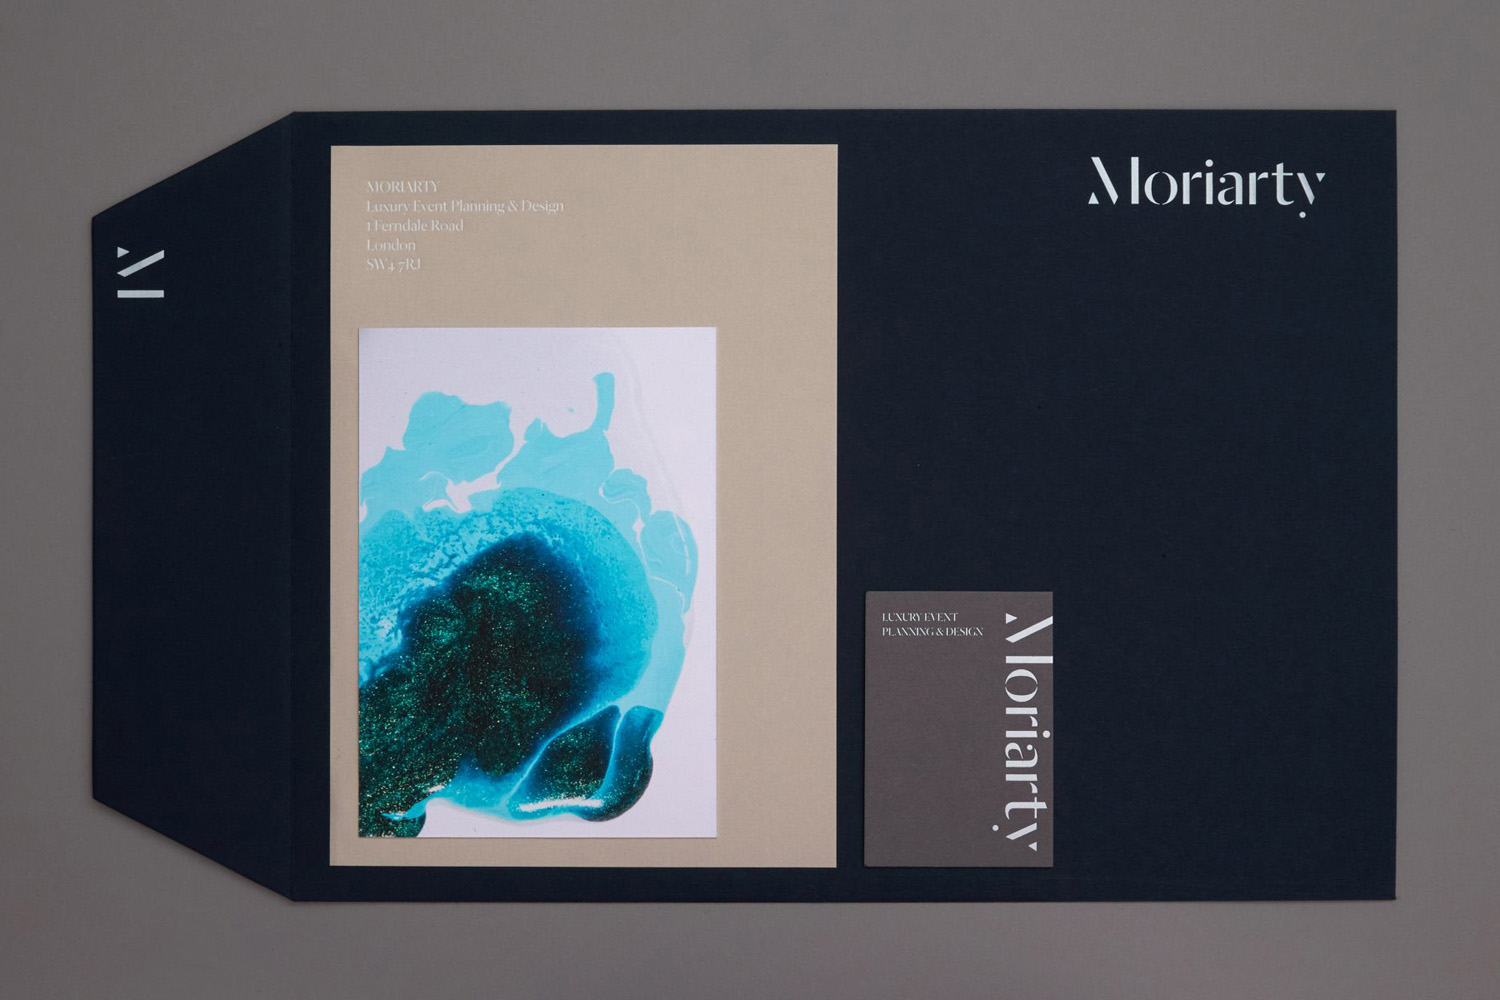 Branding by Bond for London-based event planning business Moriarty